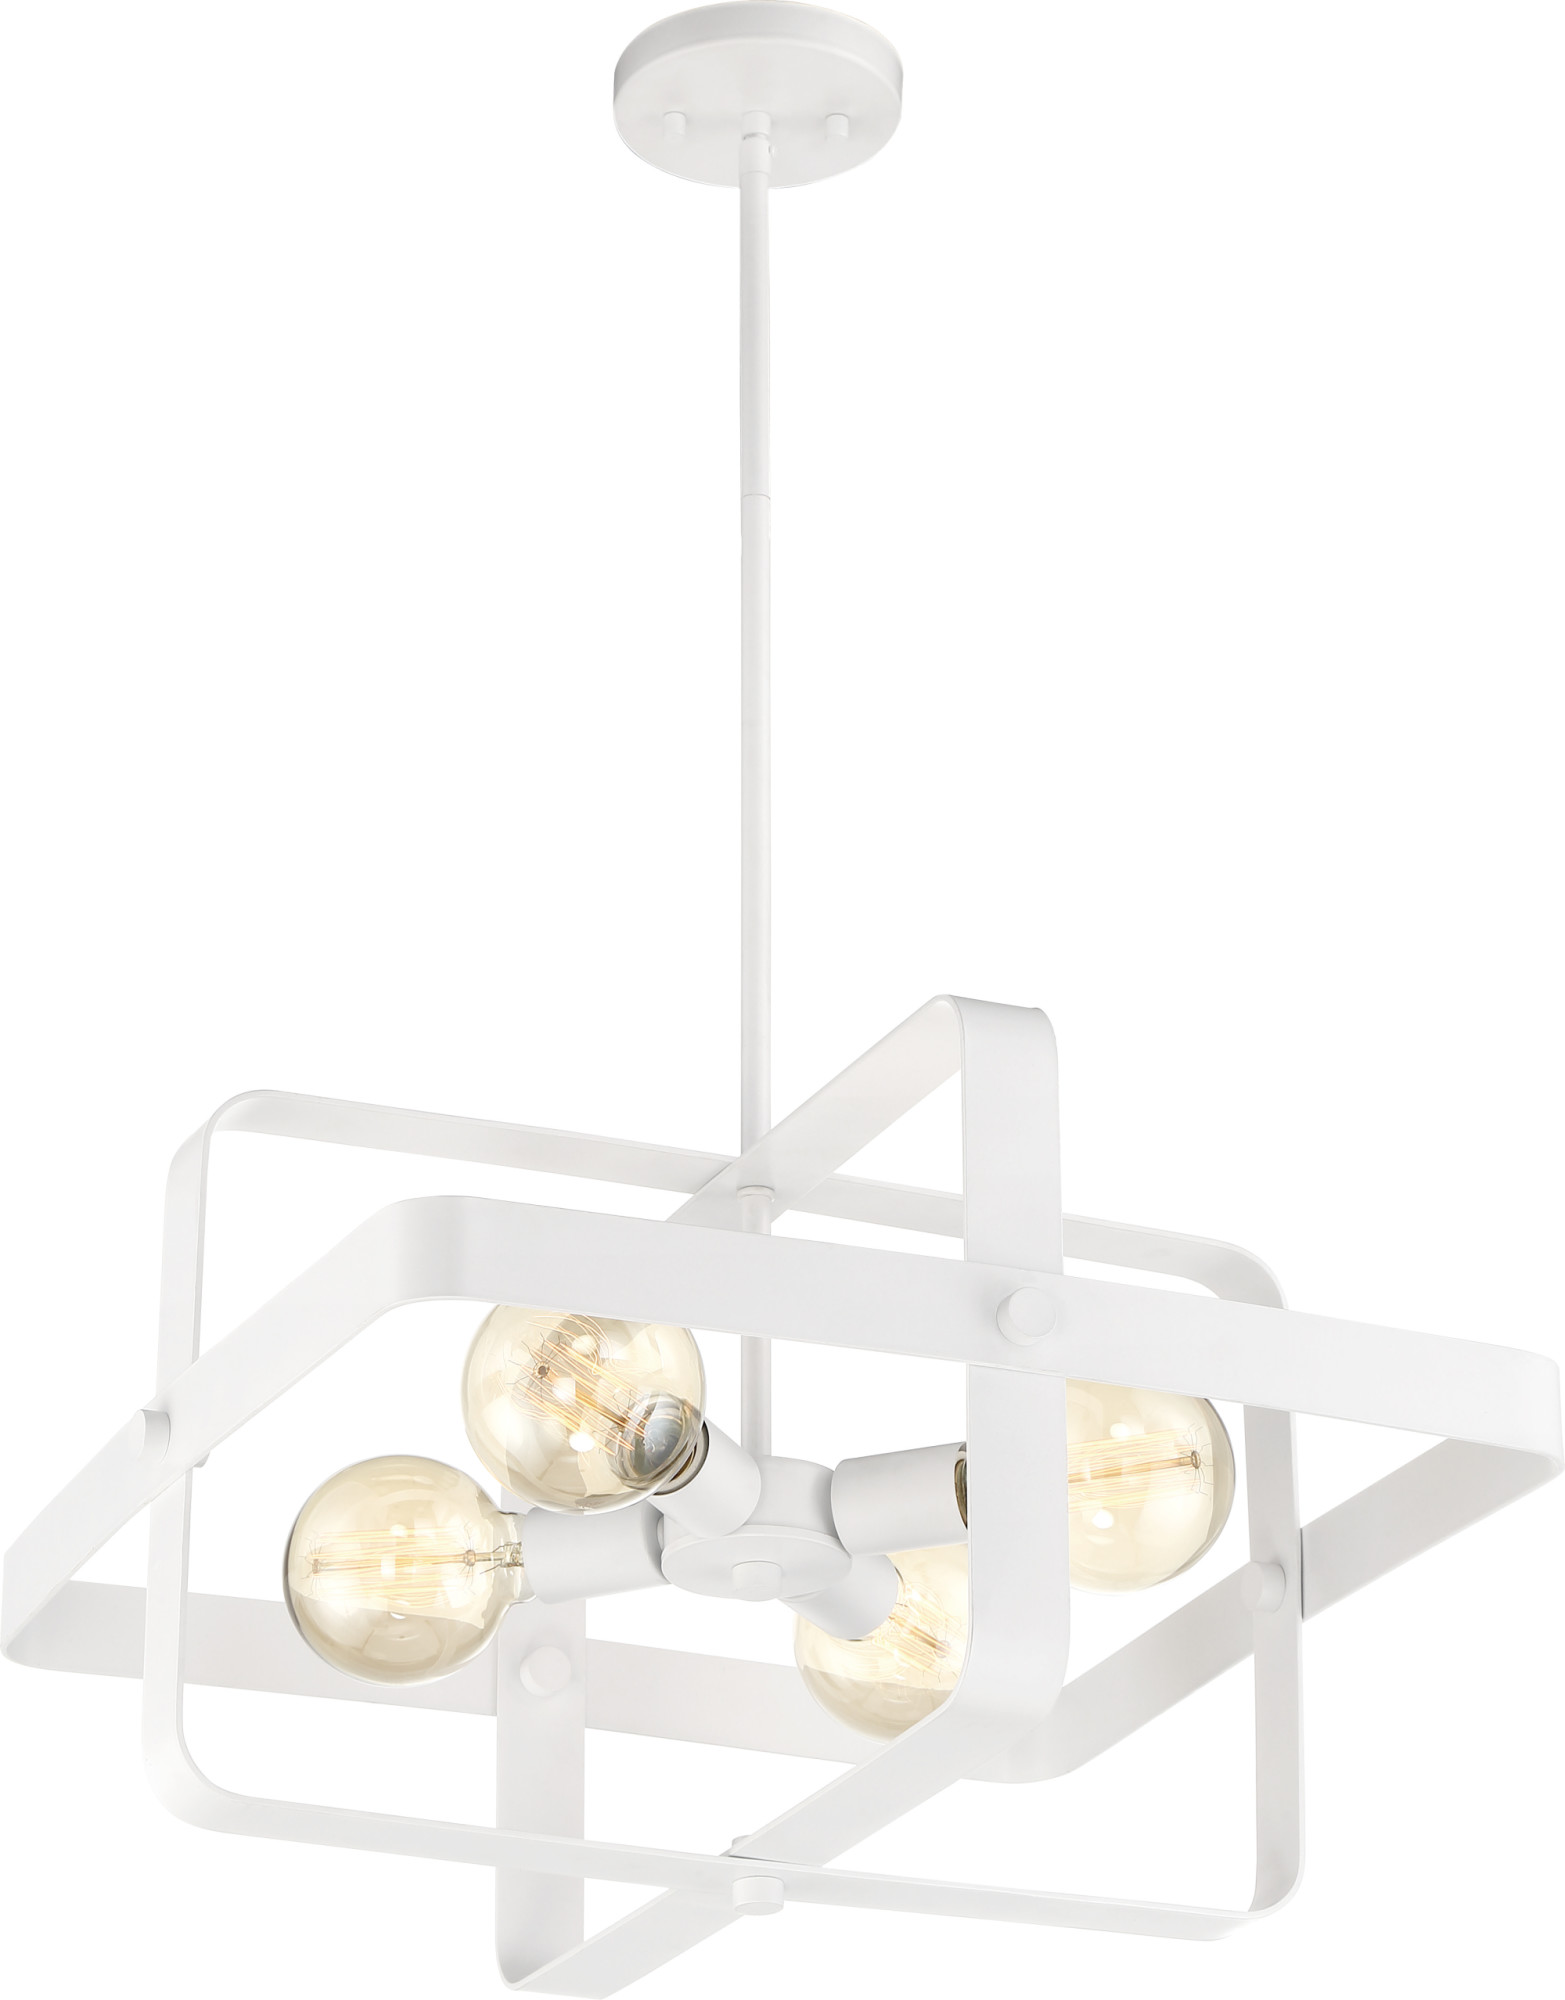 60/6722-Nuvo Lighting-Prana-4 Light Pendant-20 Inches Wide by 12 Inches High-White Finish - image 3 of 7